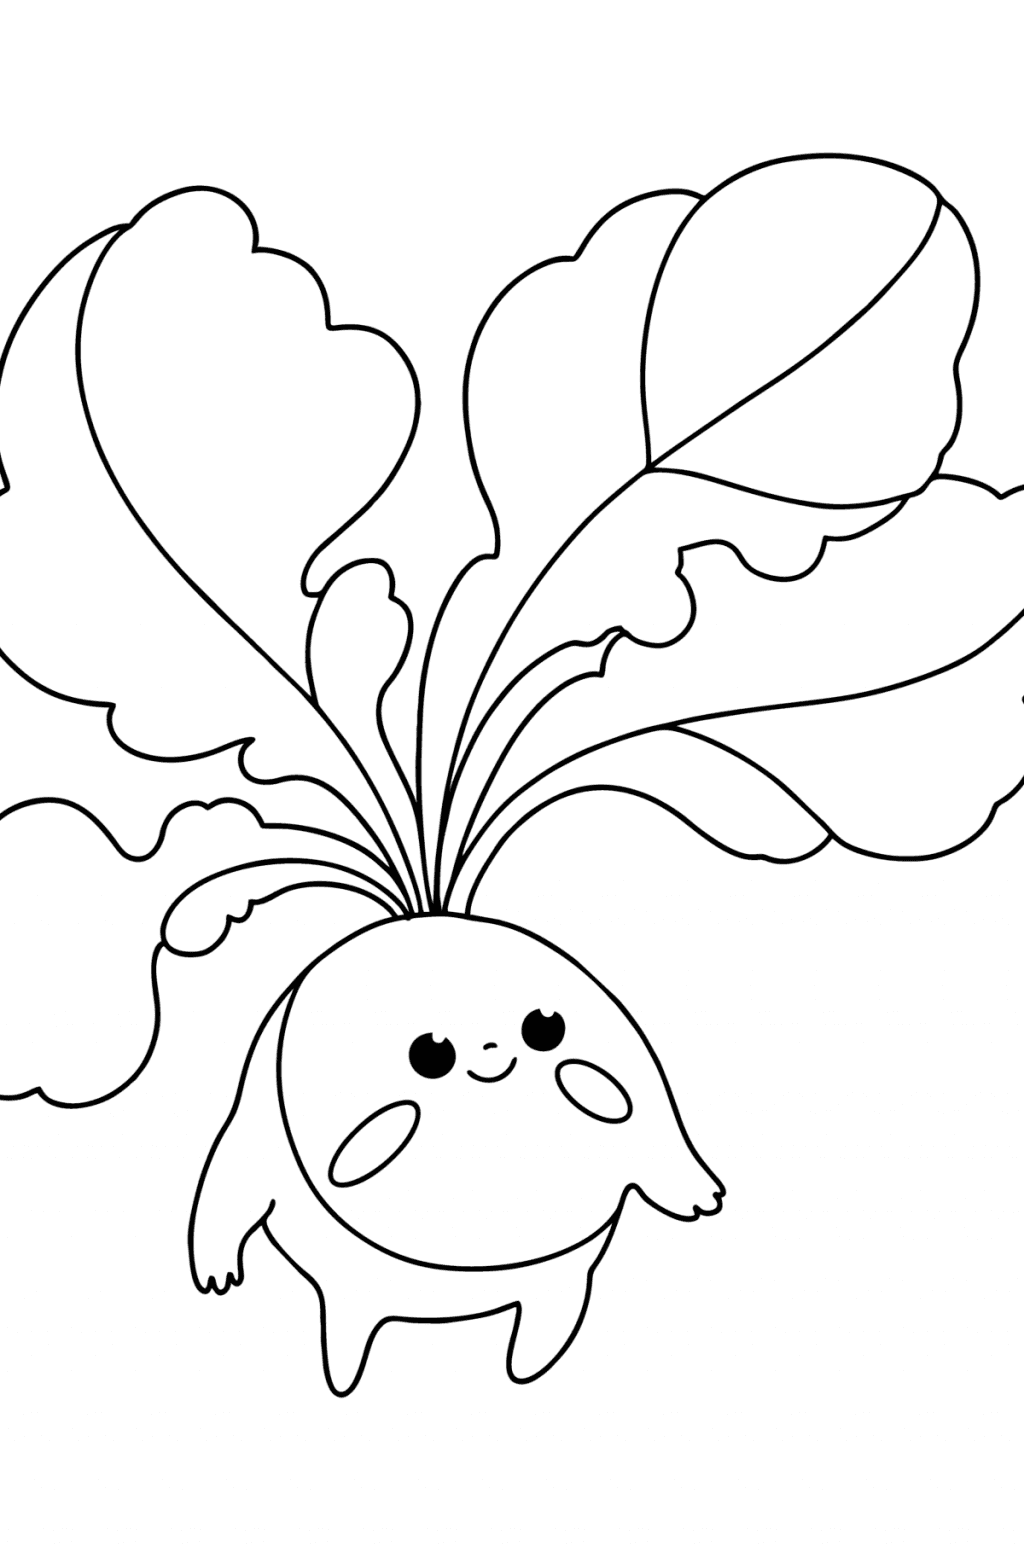 Nature Coloring Pages For Kids - Free Printable, and Online!